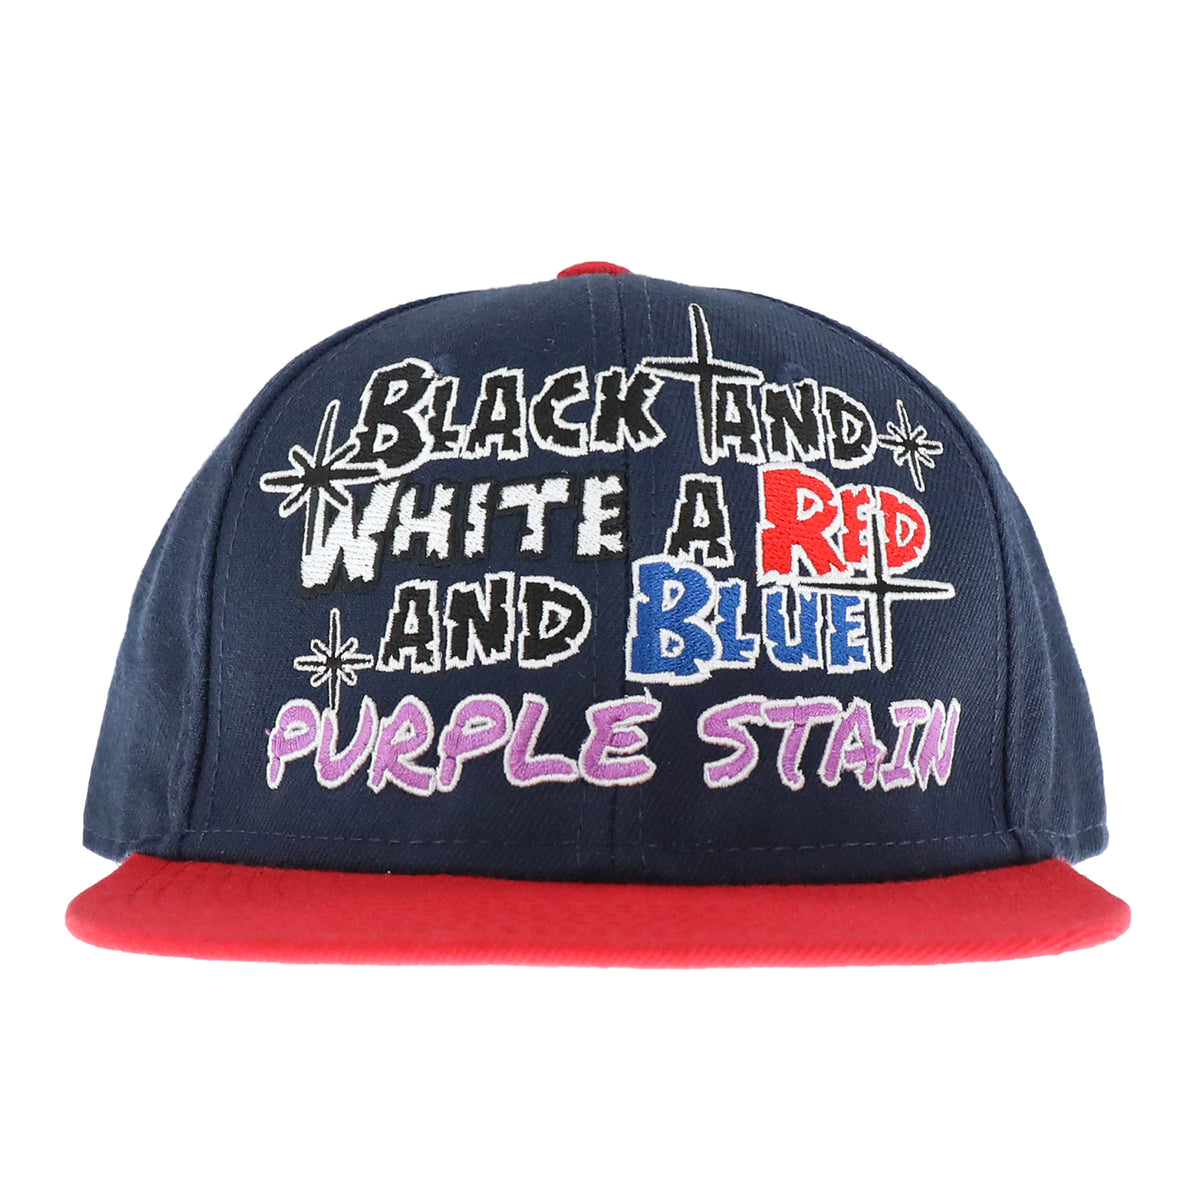 PURPLE STAIN RED AND BLUE BASEBALL CAP / NVY RED